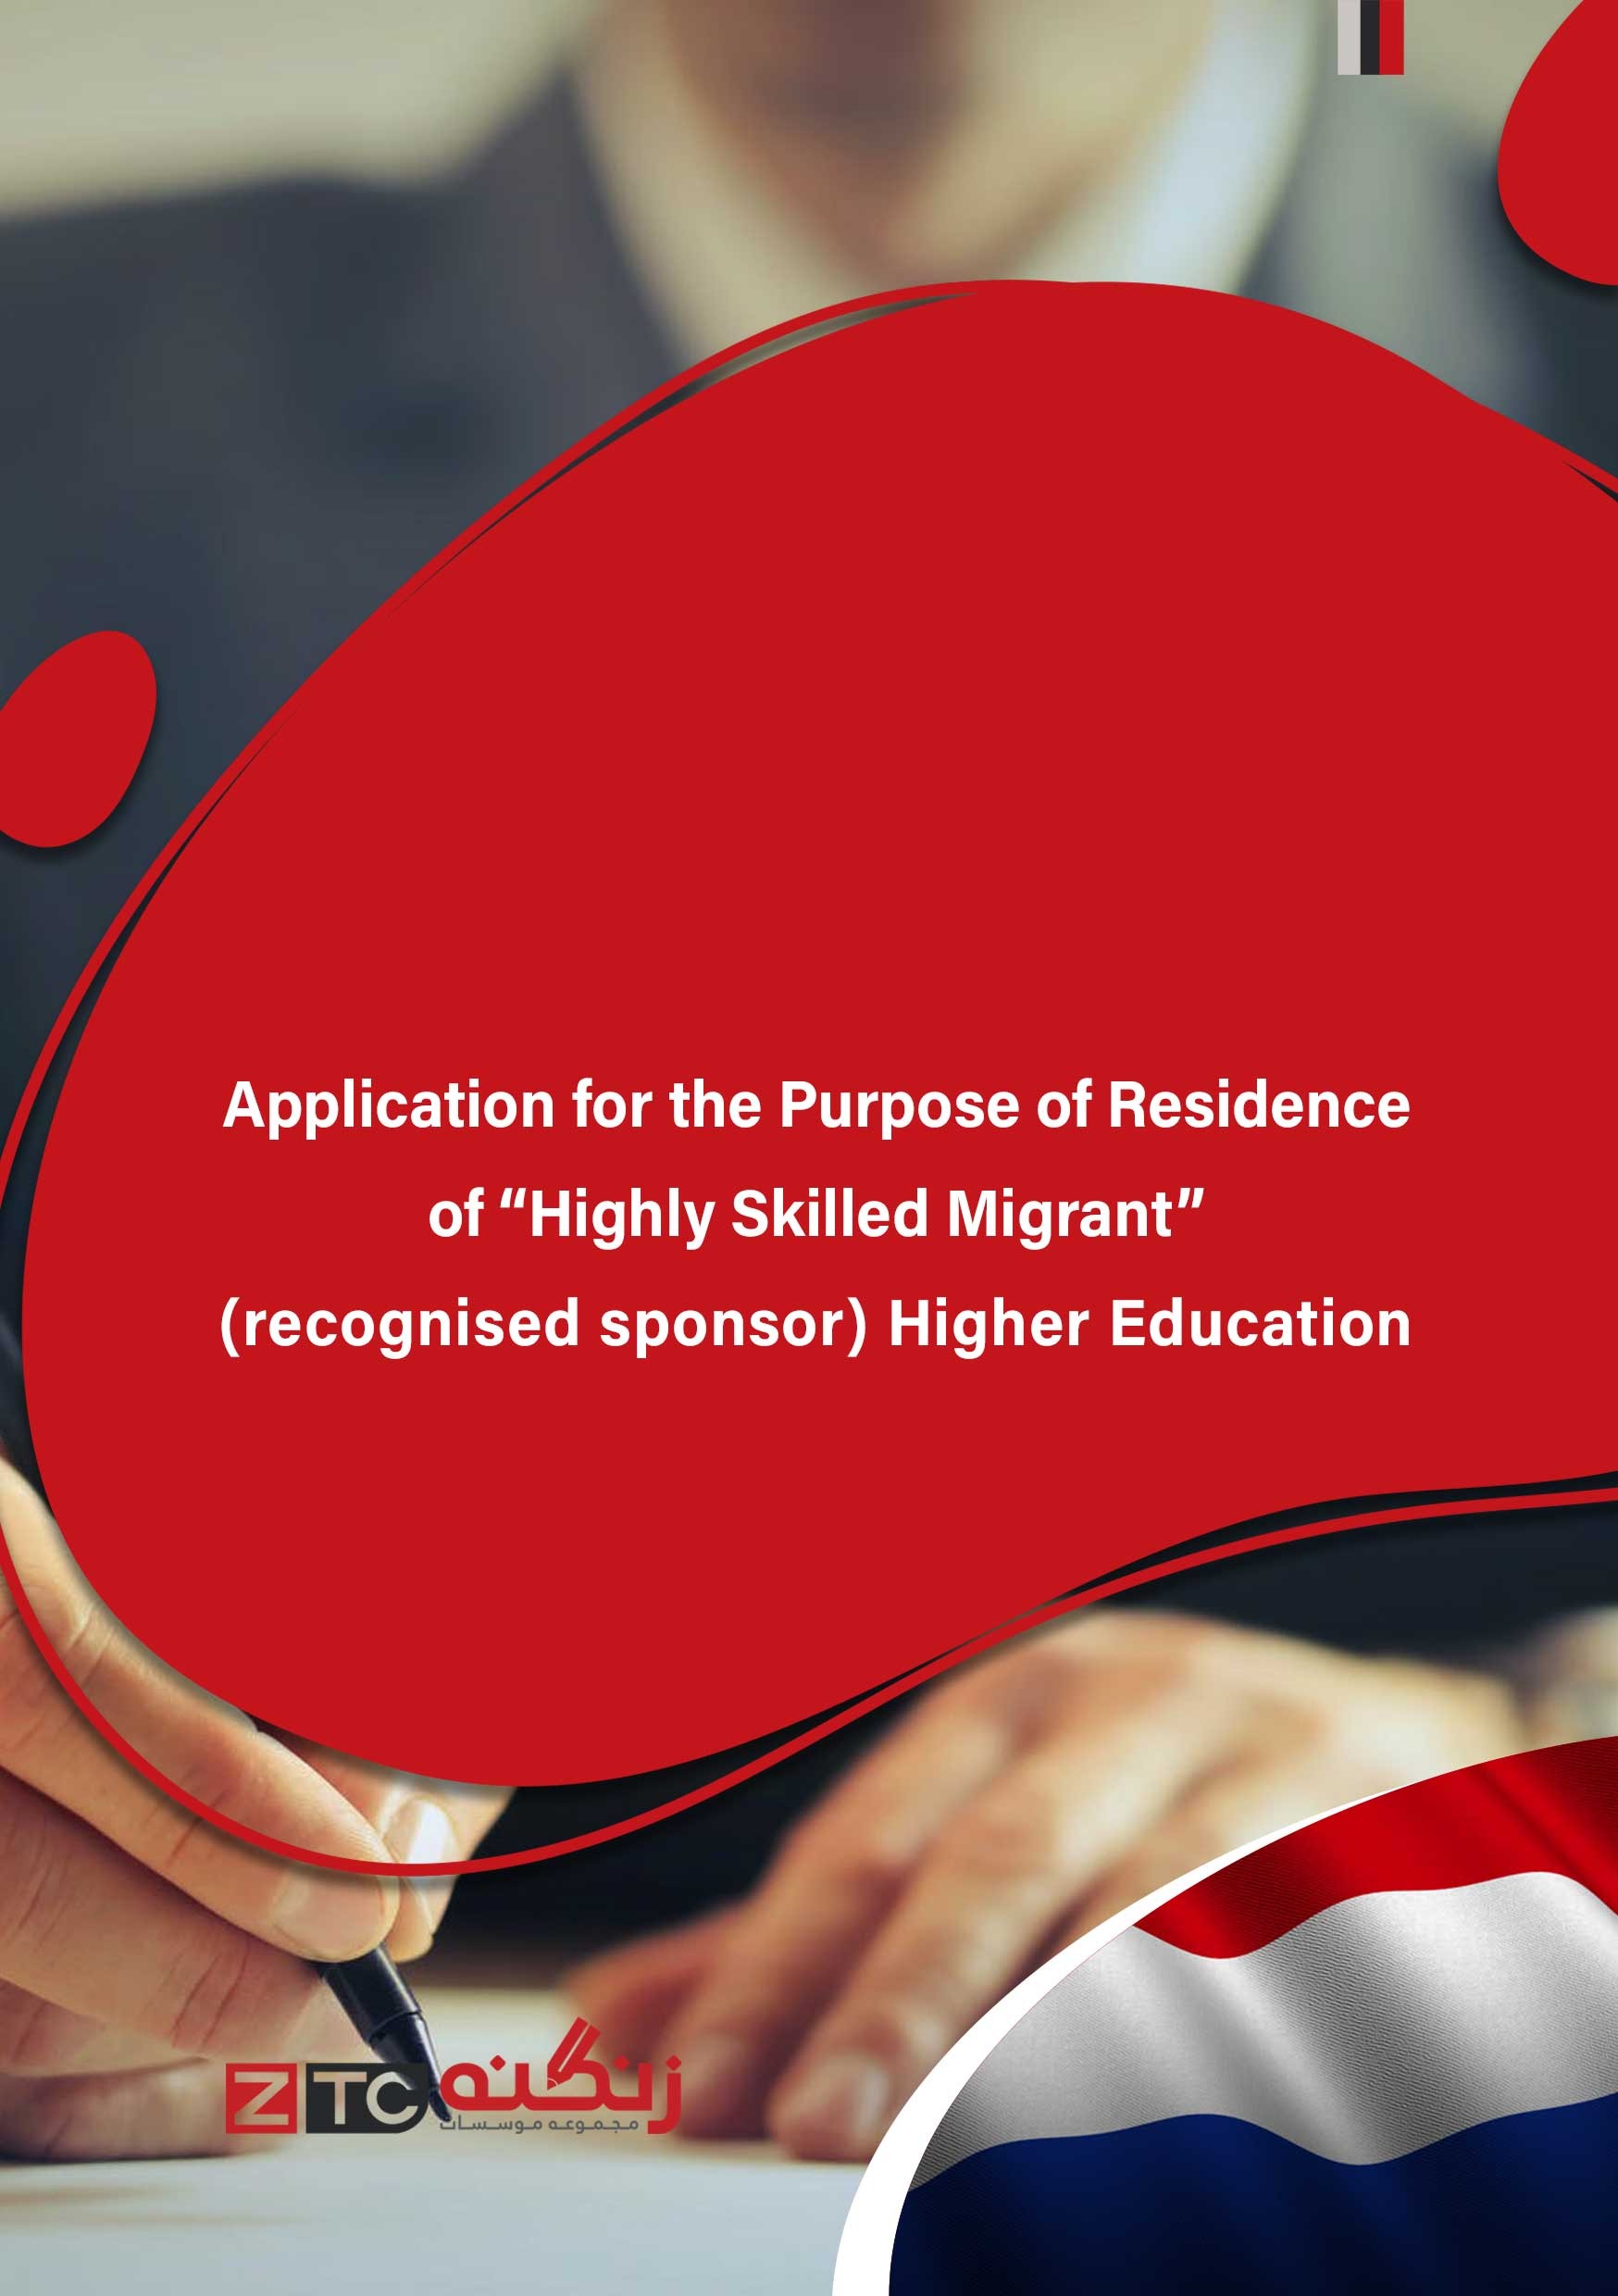 Application for the Purpose of Residence of “Highly Skilled Migrant” (recognised sponsor)